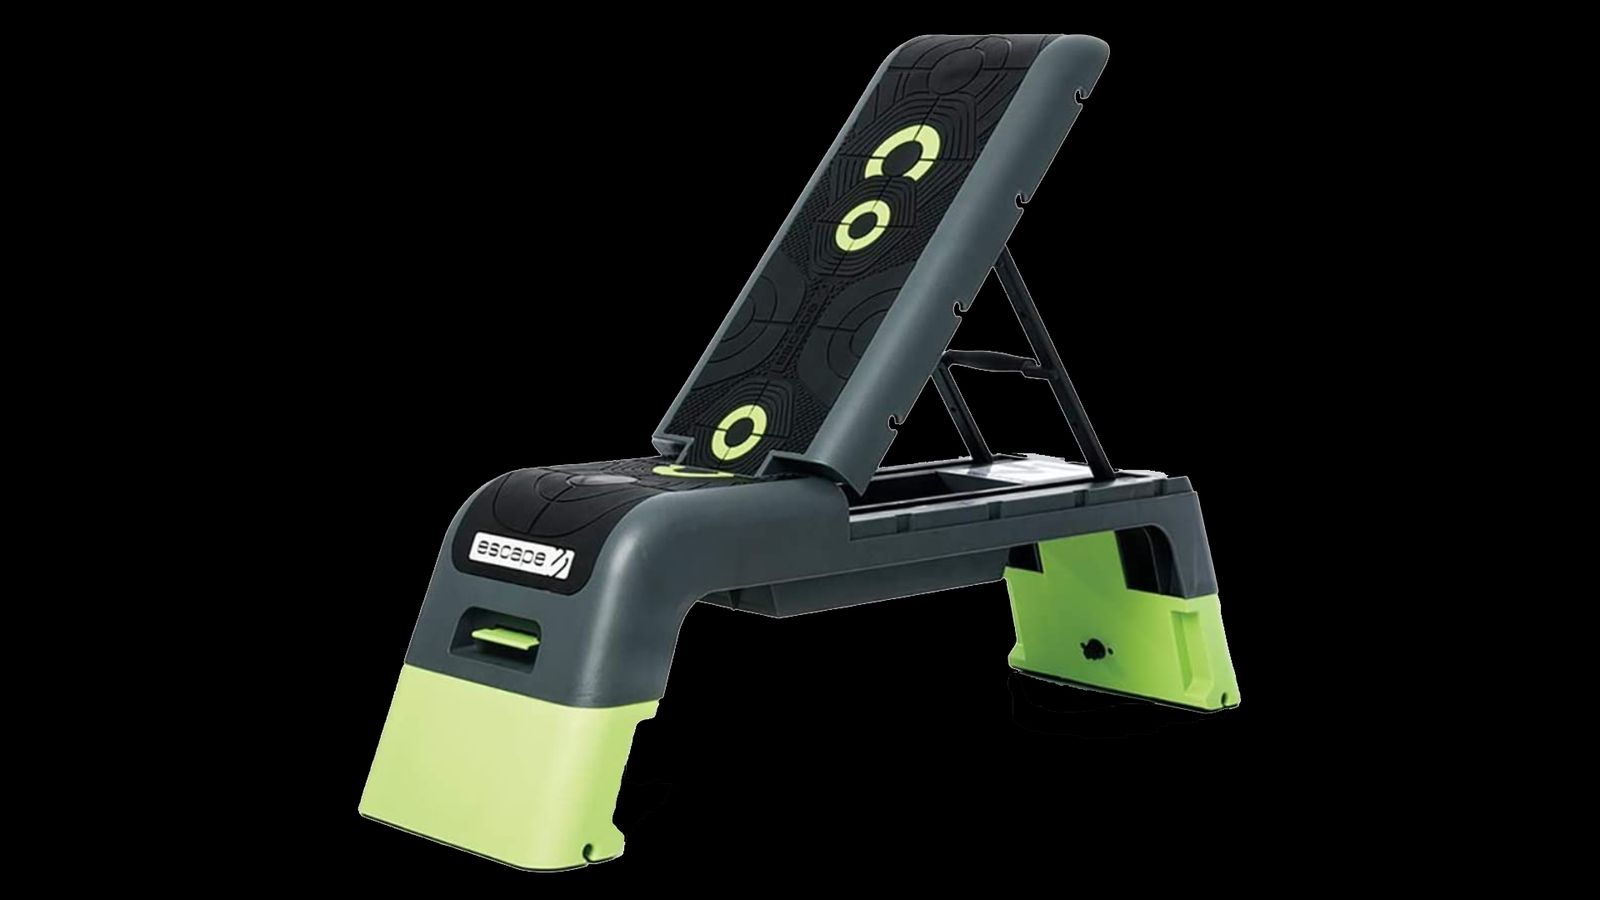 Escape Fitness Deck V2.0 product image of an exercise deck in green and black.